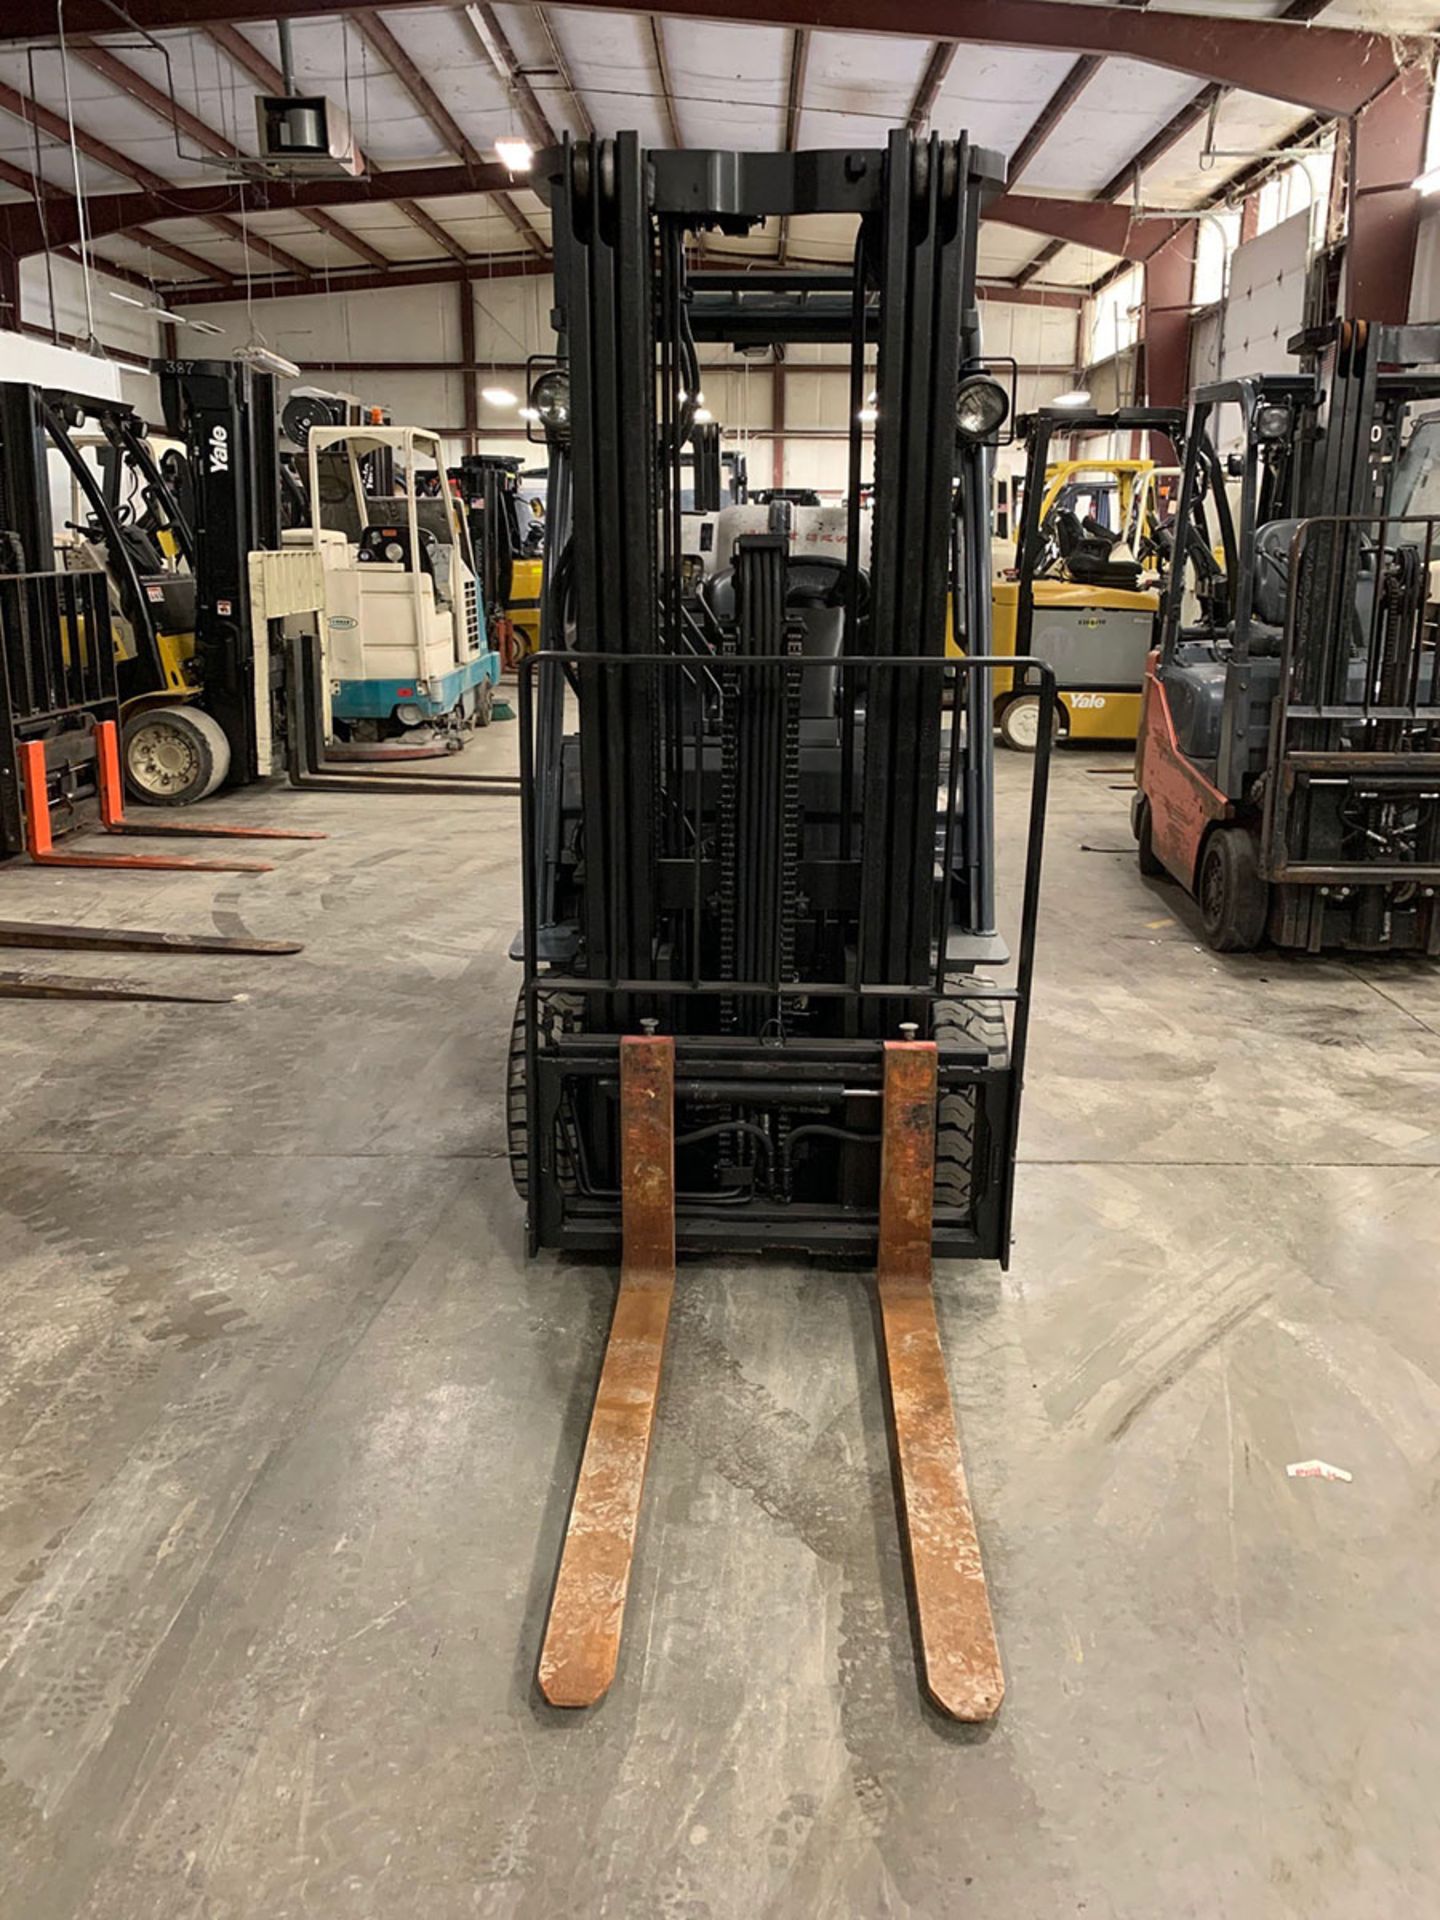 2012 TOYOTA 5,000 LB. CAPACITY FORKLIFT, MODEL: 8FGCU25, LPG, 3-STAGE, SS, RECONDITIONED BY TOYOTA - Image 4 of 10